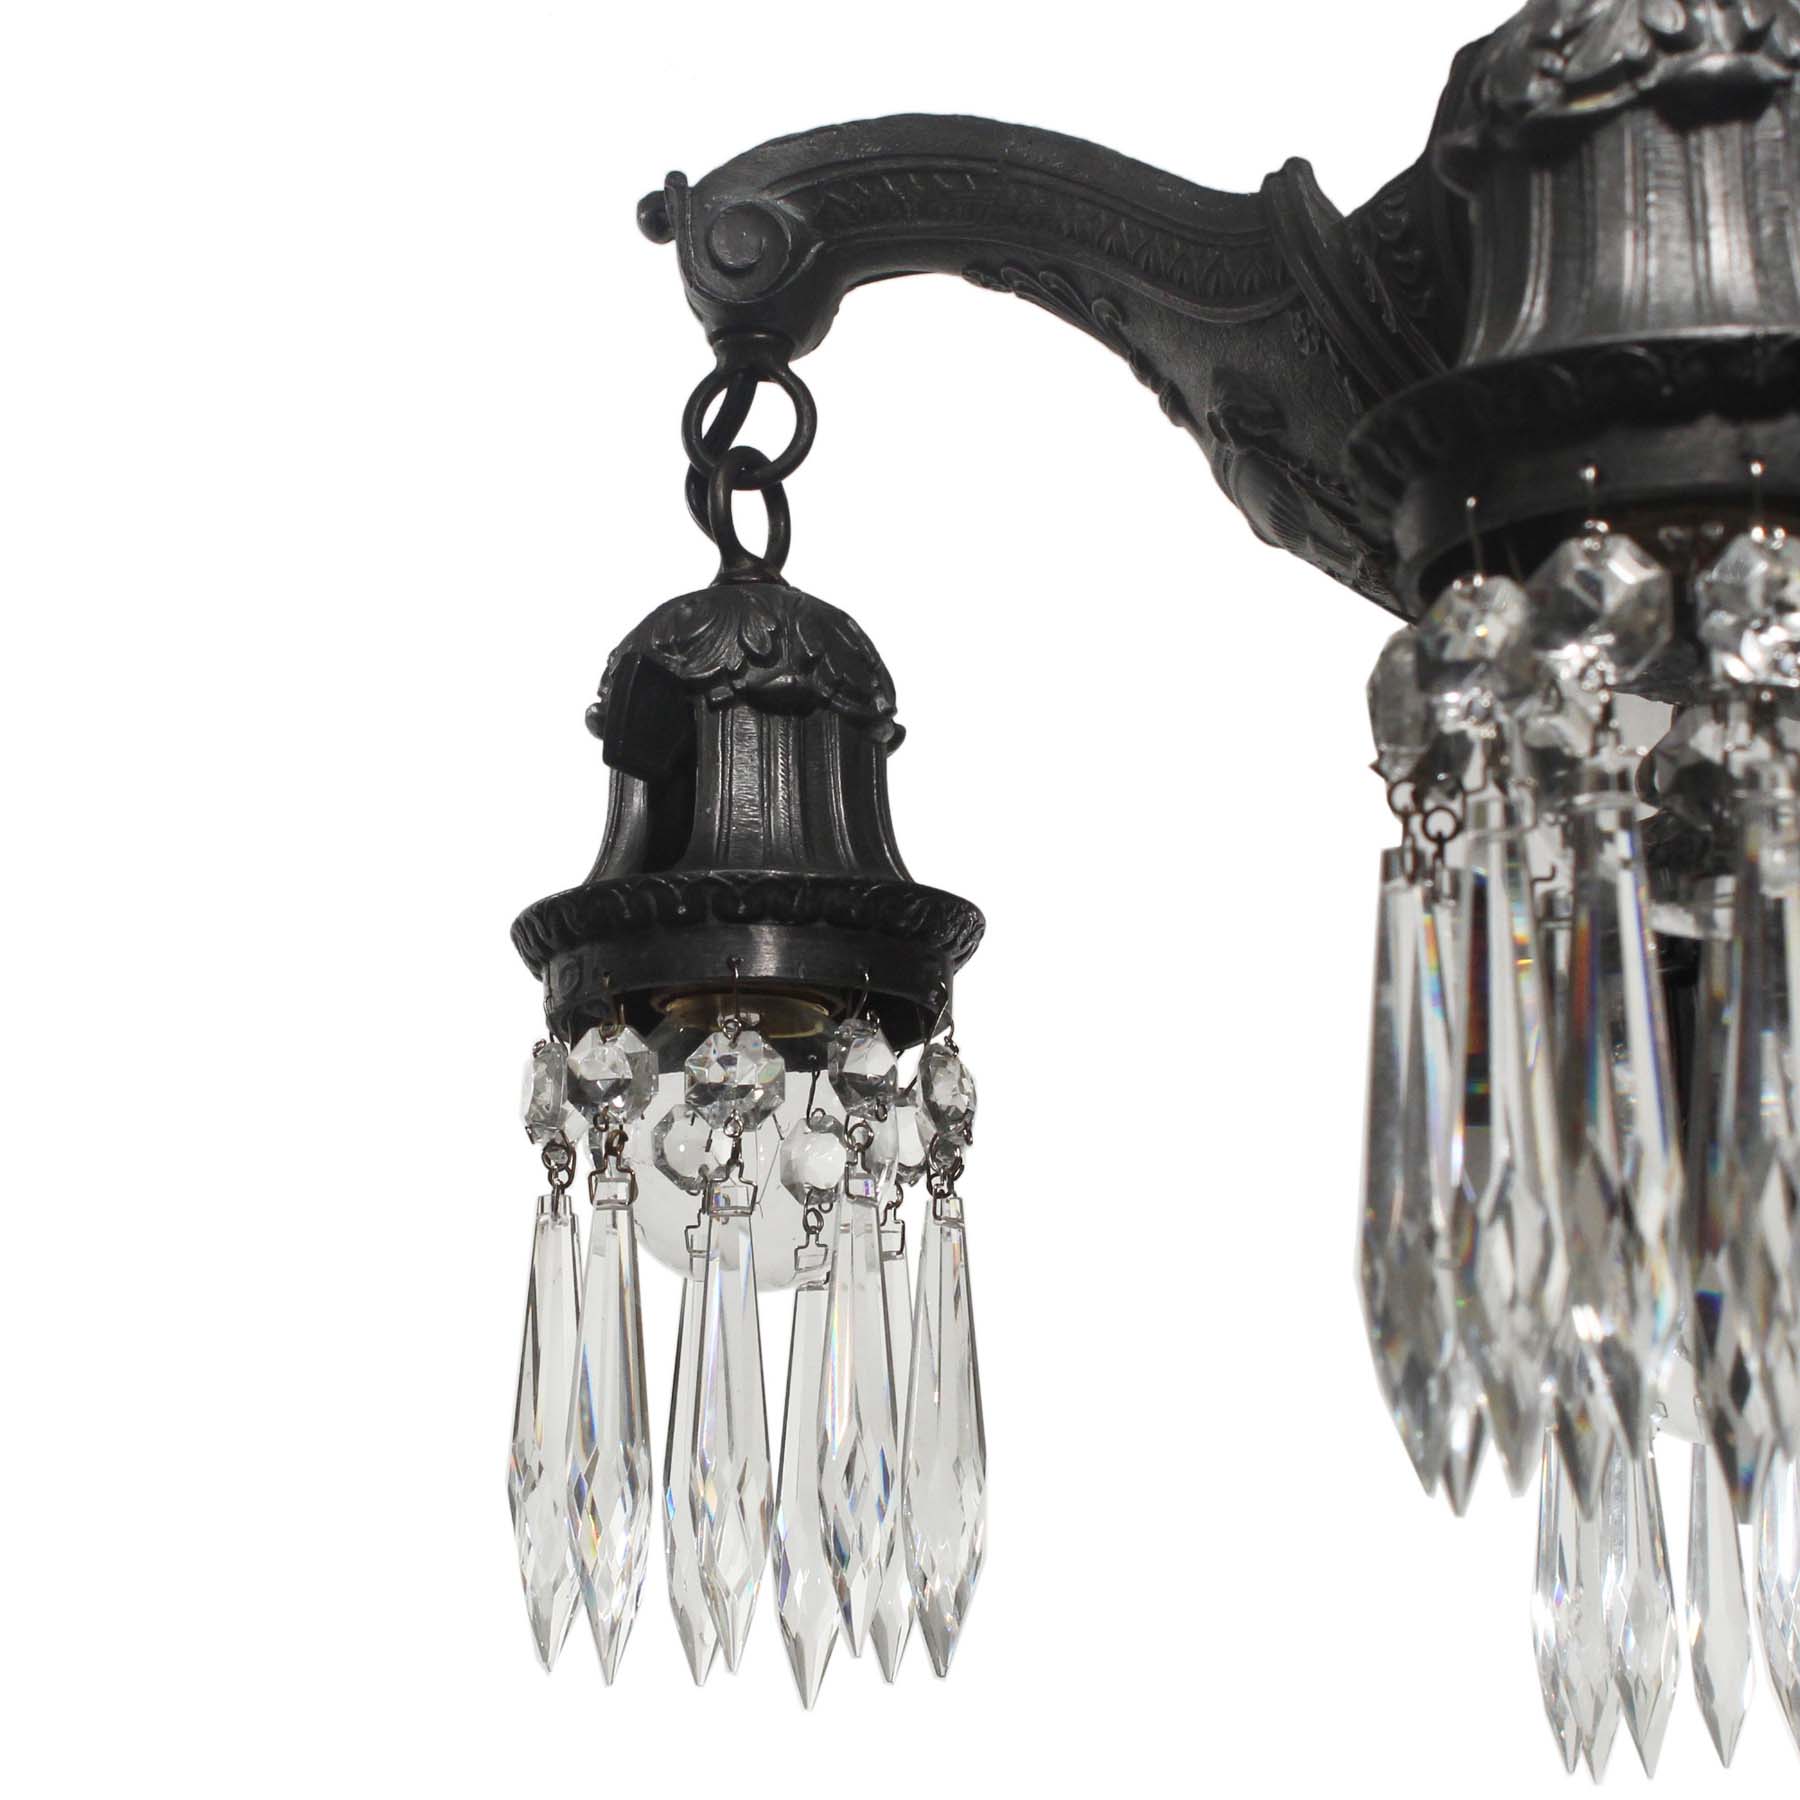 SOLD Antique Figural Neoclassical Chandelier with Prisms, Adam Style-67501